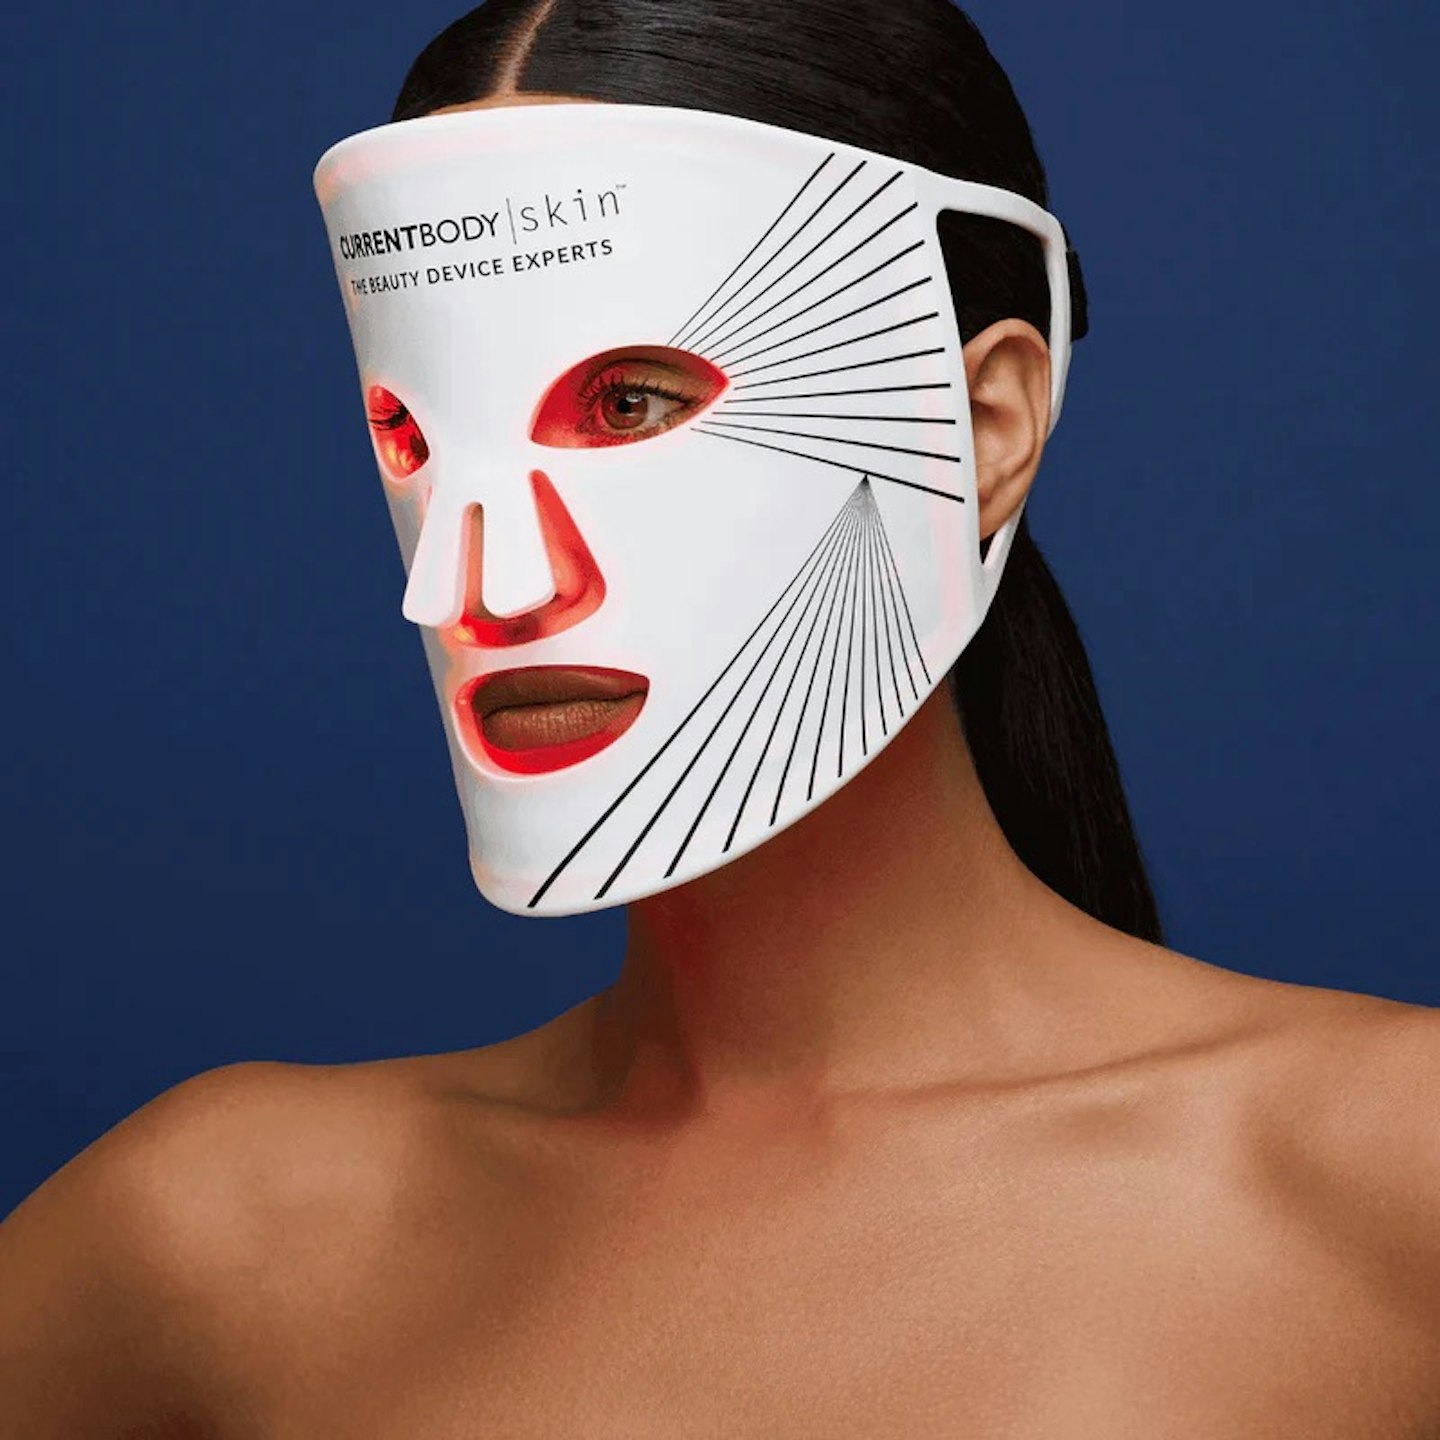 CurrentBody Skin LED Light Therapy Face Mask 